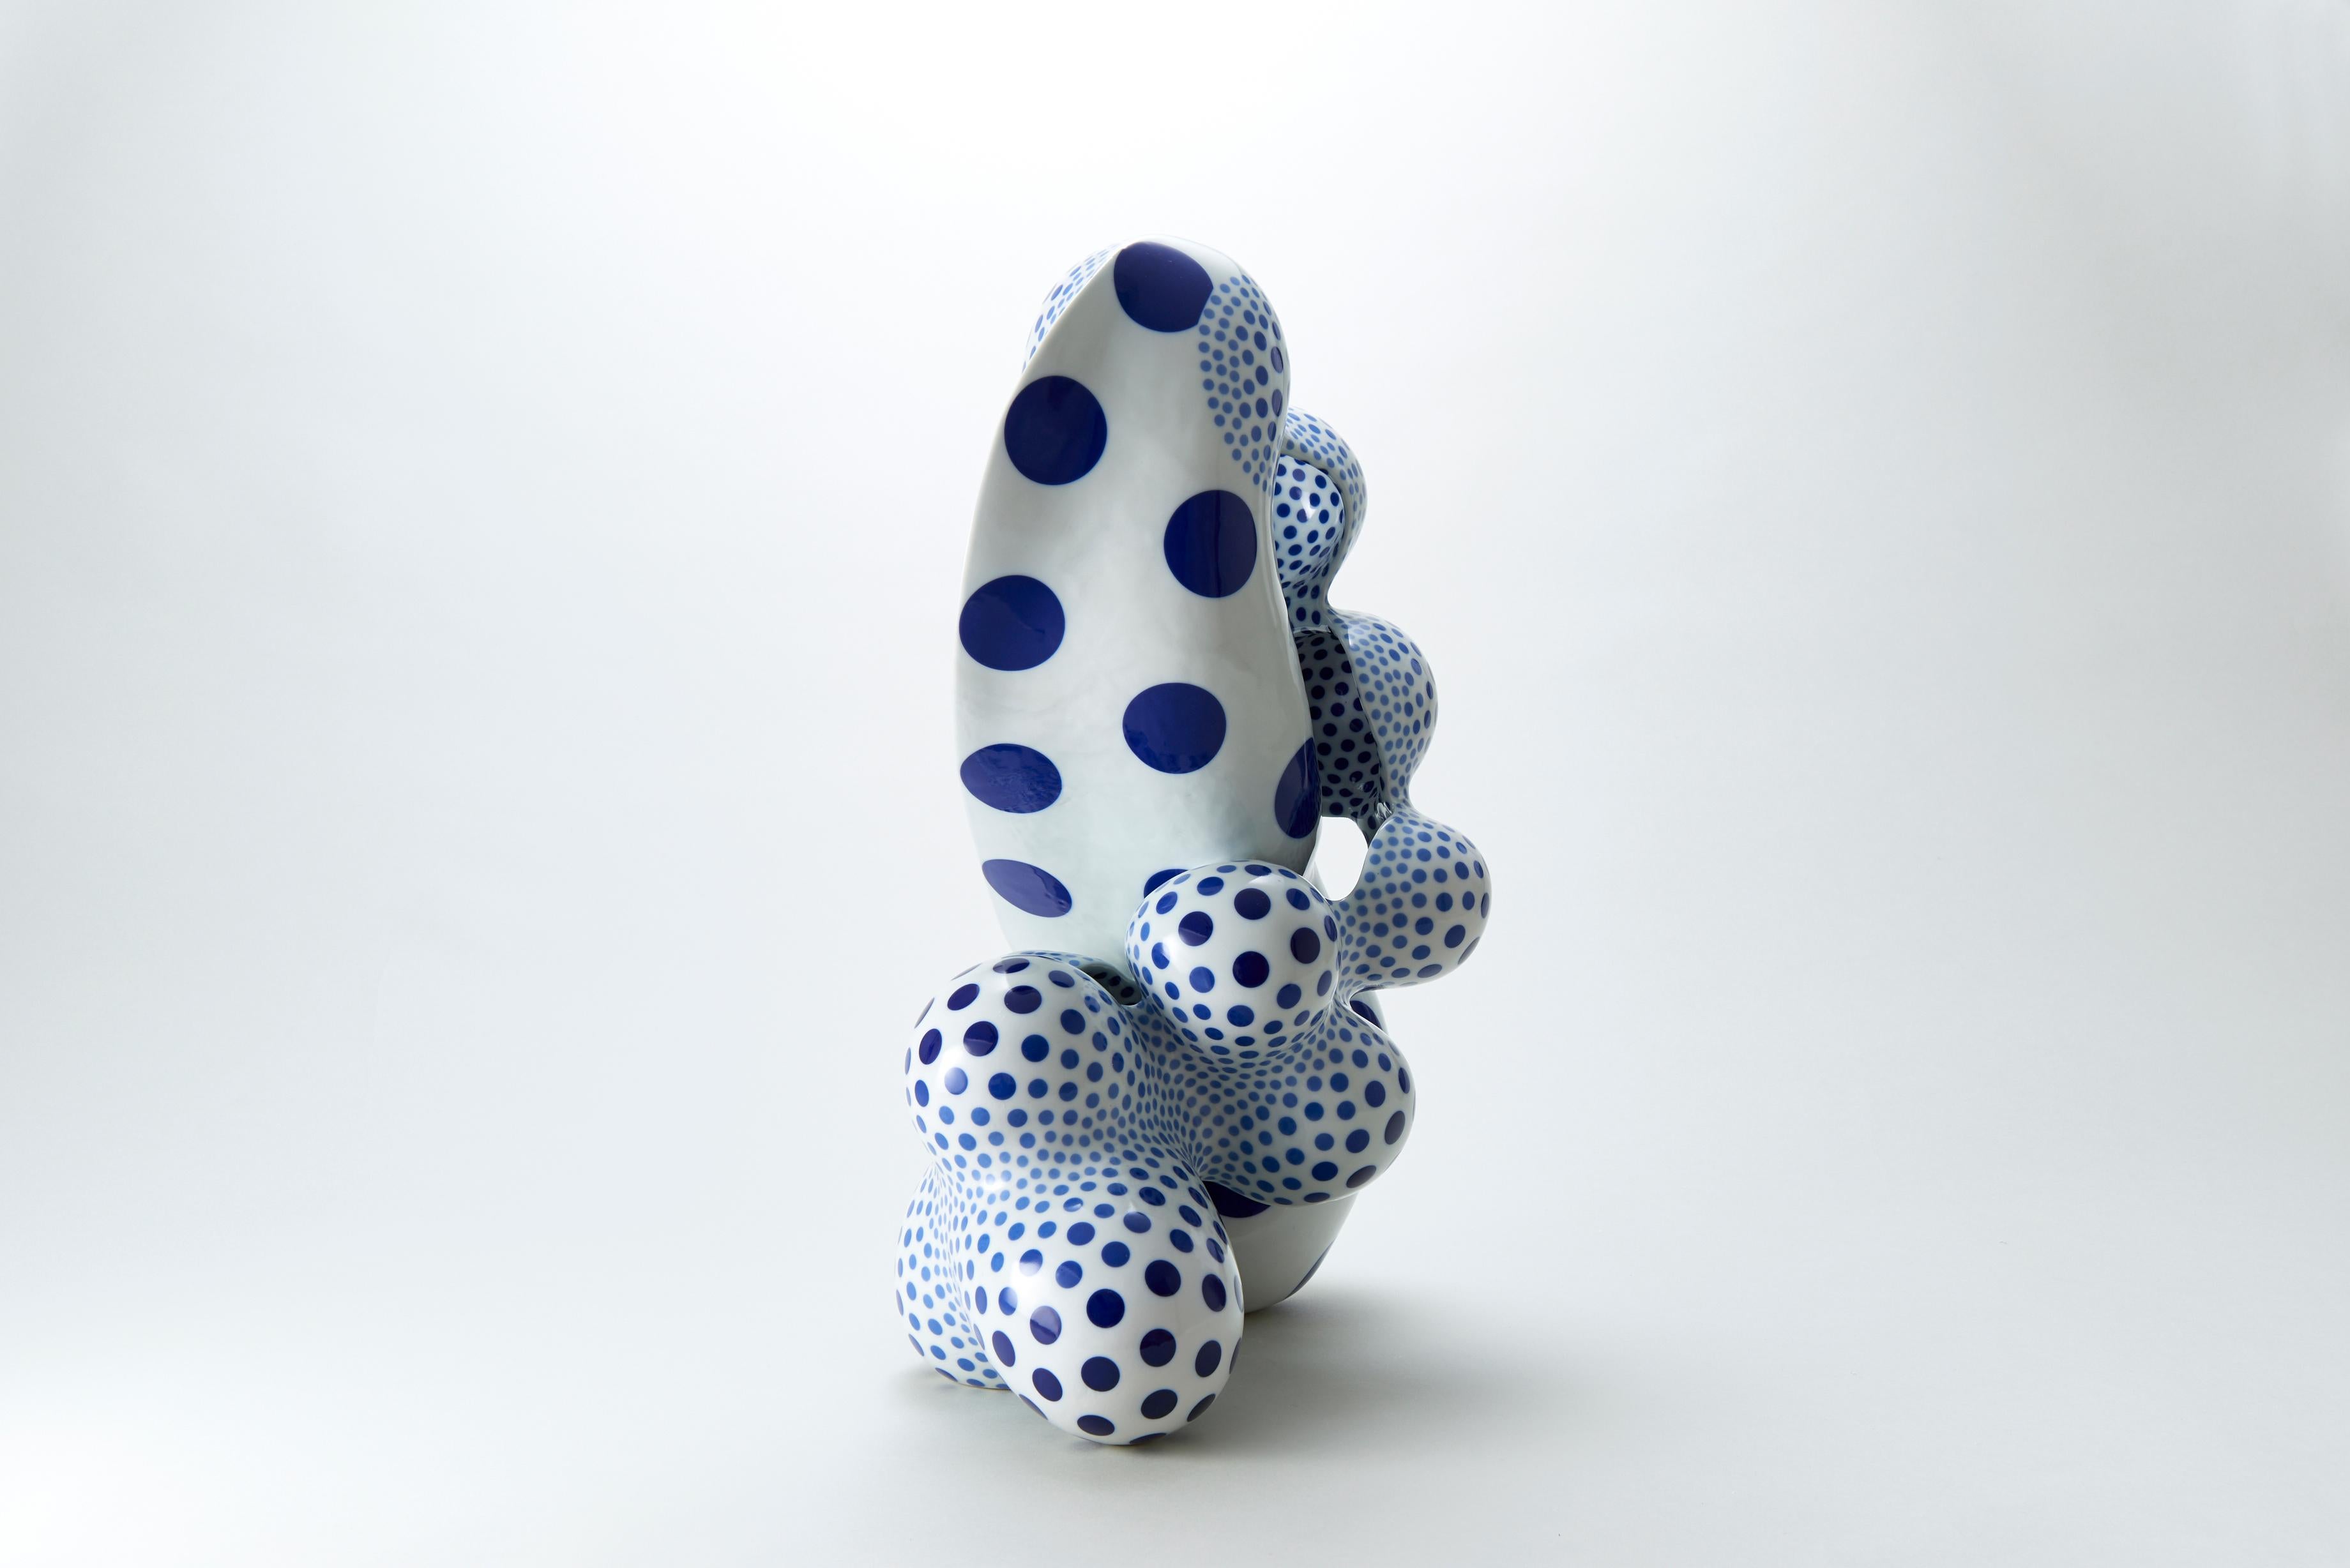 Japanese artist Harumi Nakashima creates free-form ceramic sculptures that feature organic, yet psychedelic characteristics. Nakashima, mostly known for beautifully structured, odd geometric shapes embellished with iconic polka dots, works with a